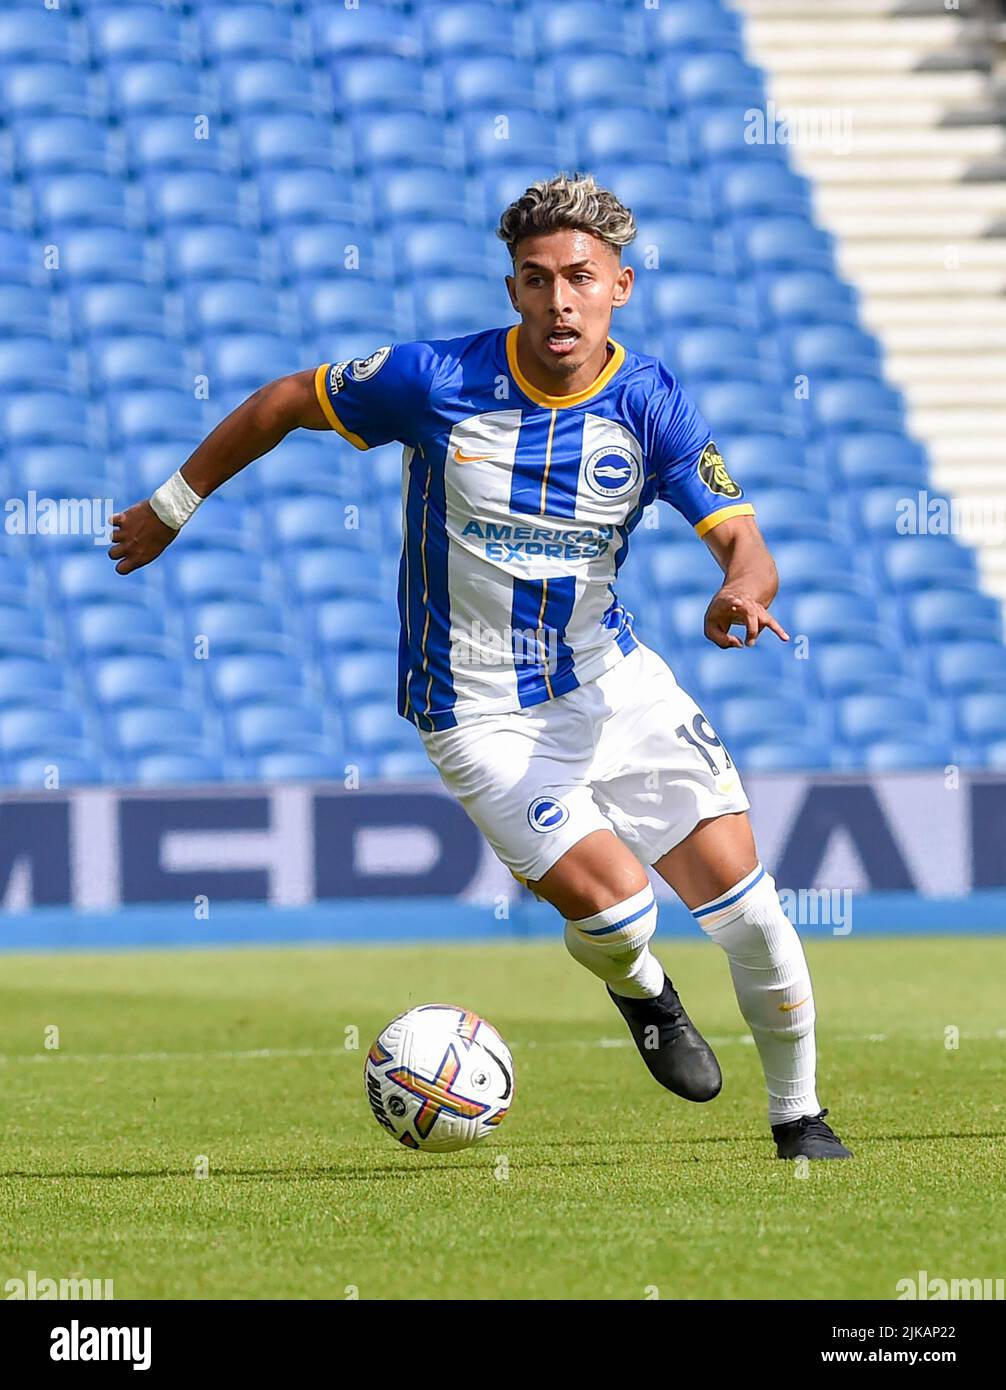 Jeremy Sarmiento of Brighton during the Pre Season friendly match between Brighton and Hove Albion and Espanyol at  the American Express Community Stadium, Brighton, UK - 30th July 2022  Editorial use only. No merchandising. For Football images FA and Premier League restrictions apply inc. no internet/mobile usage without FAPL license - for details contact Football Dataco Stock Photo